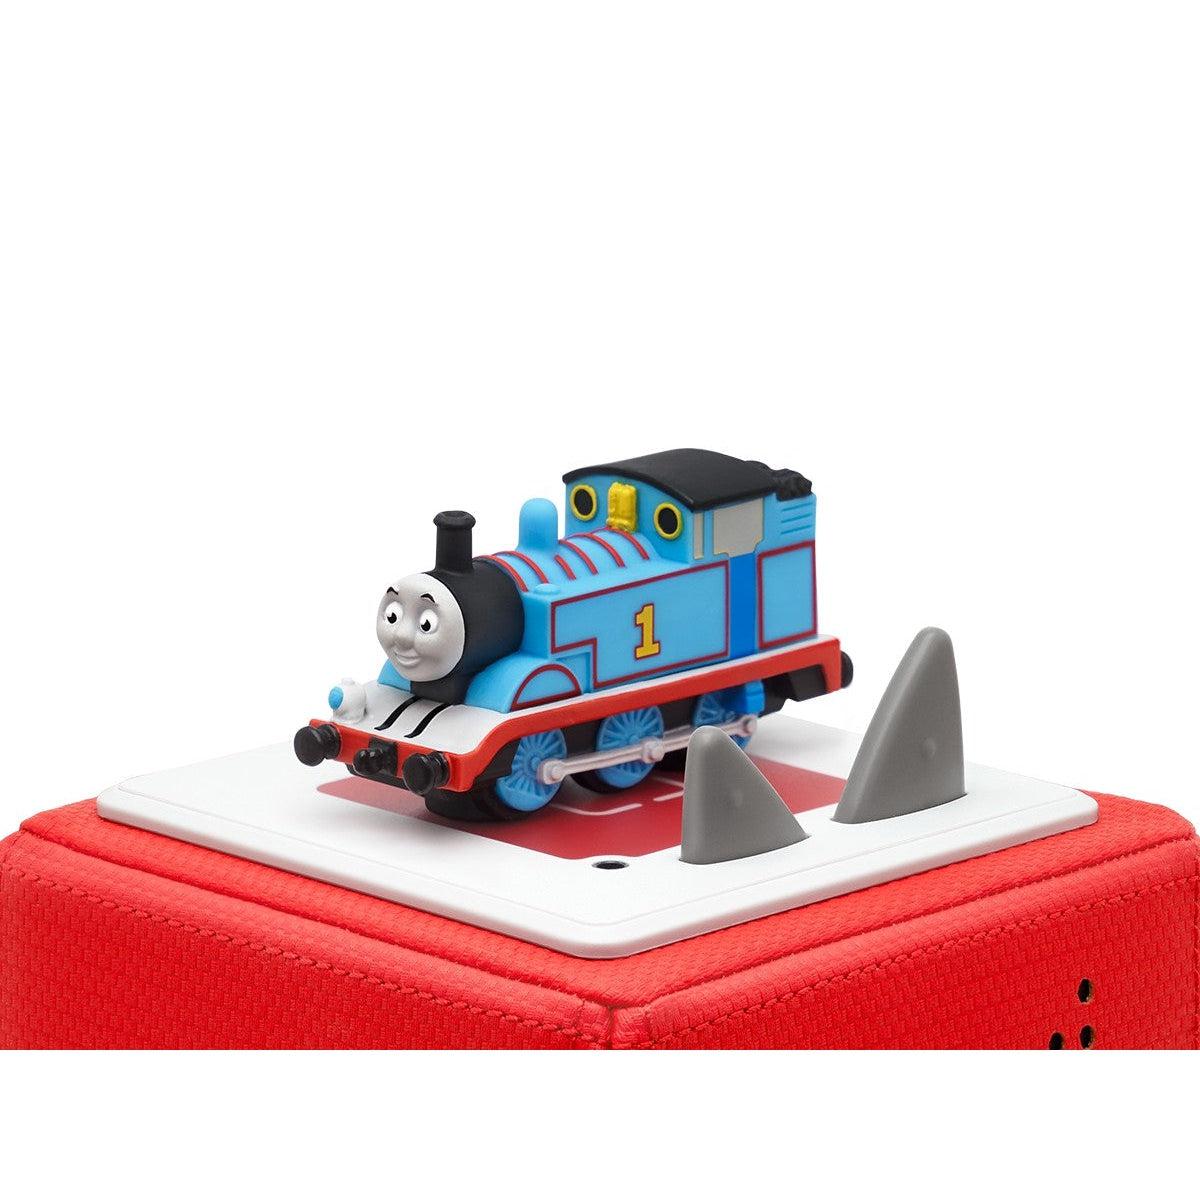 Tonies Thomas The Tank Engine - The Adventure Begins - Audio Character for use with Toniebox Player